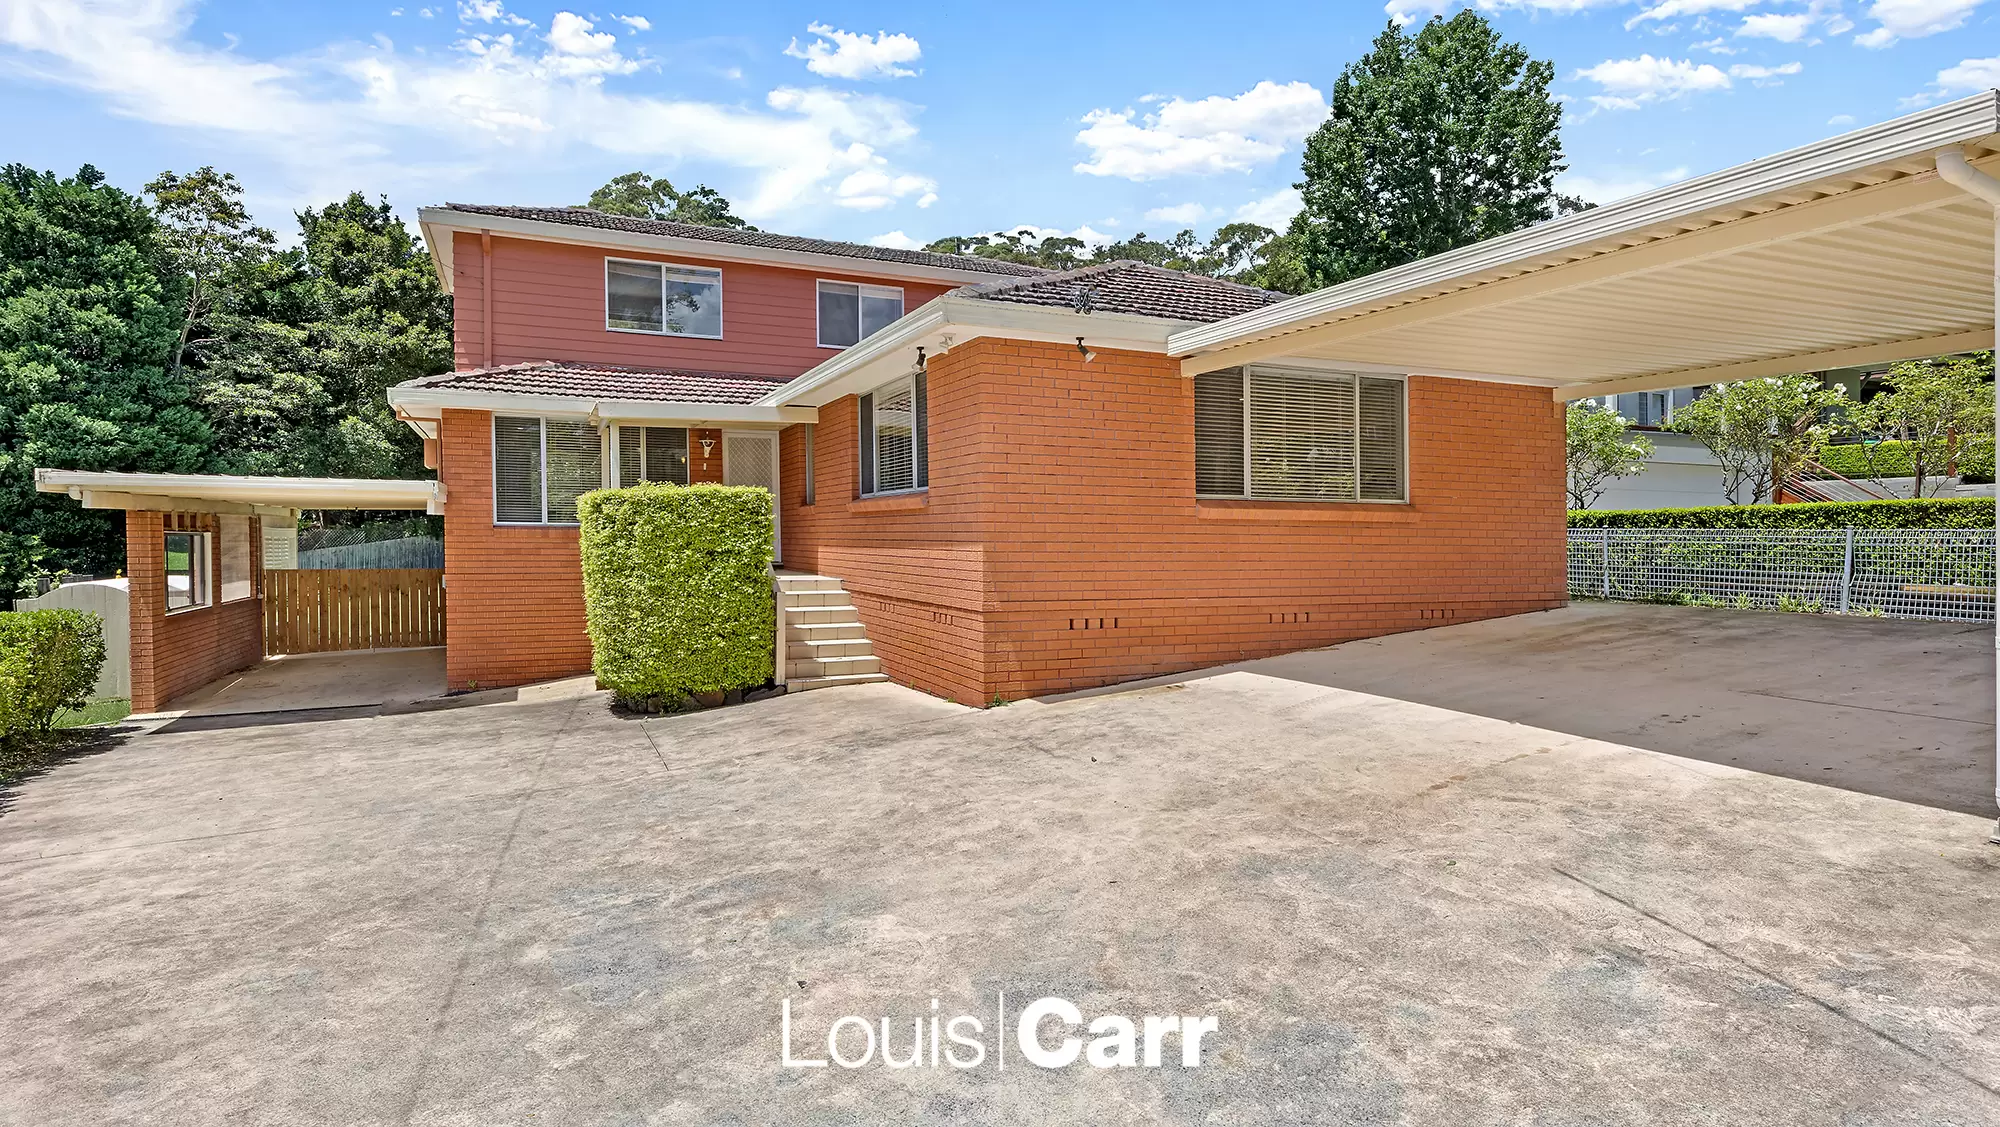 Photo #1: 24 Waninga Road, Hornsby Heights - Leased by Louis Carr Real Estate